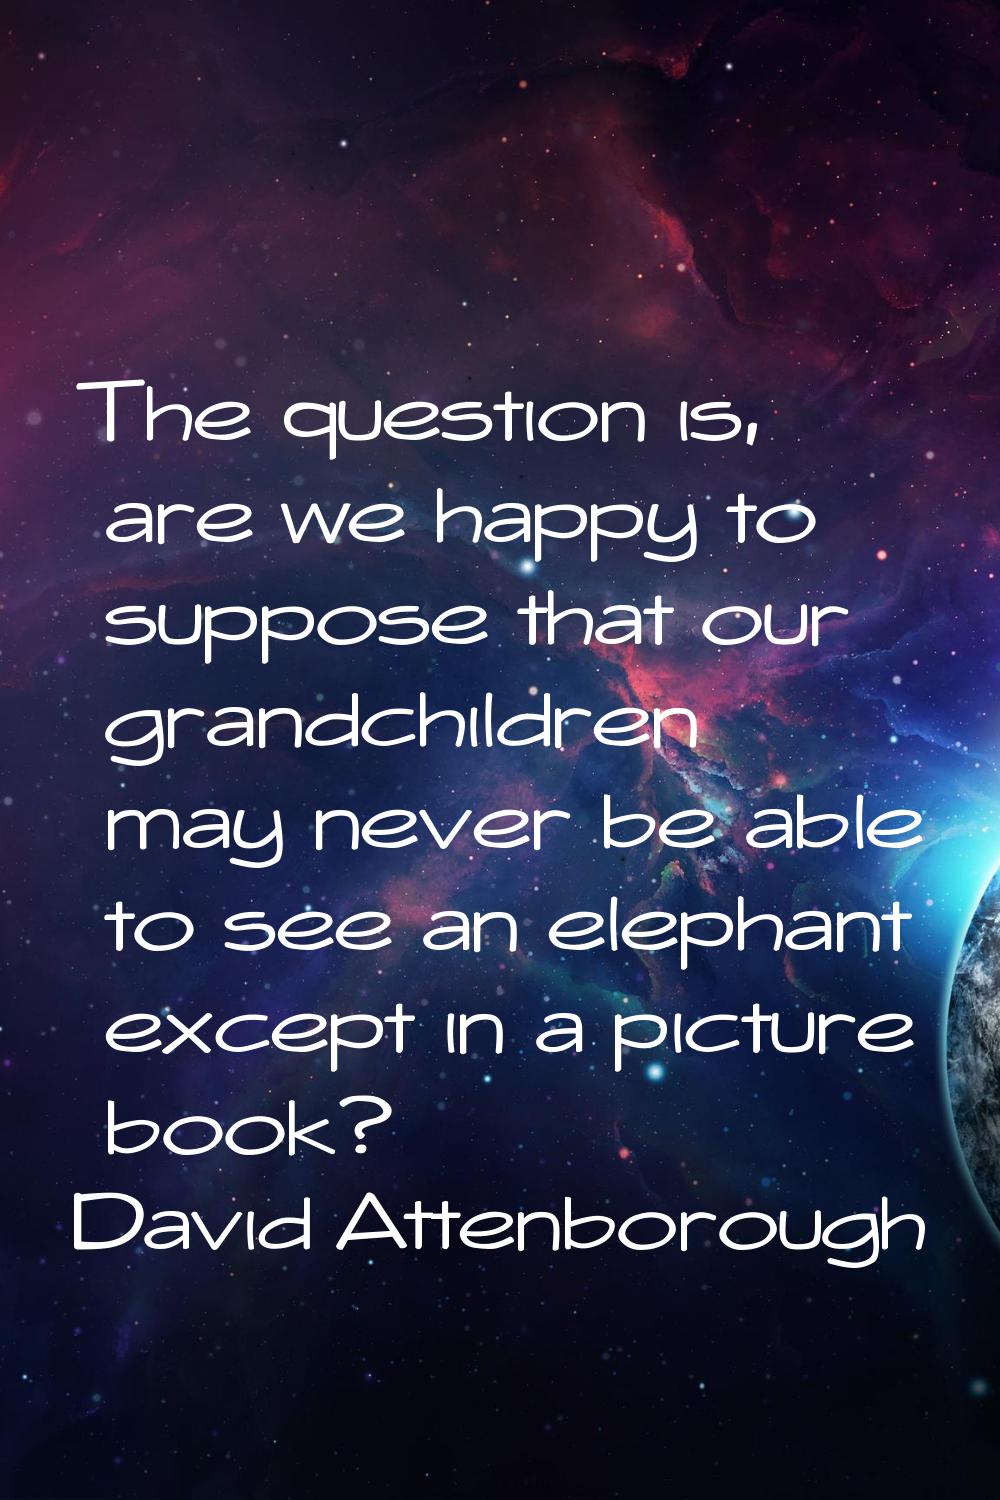 The question is, are we happy to suppose that our grandchildren may never be able to see an elephan